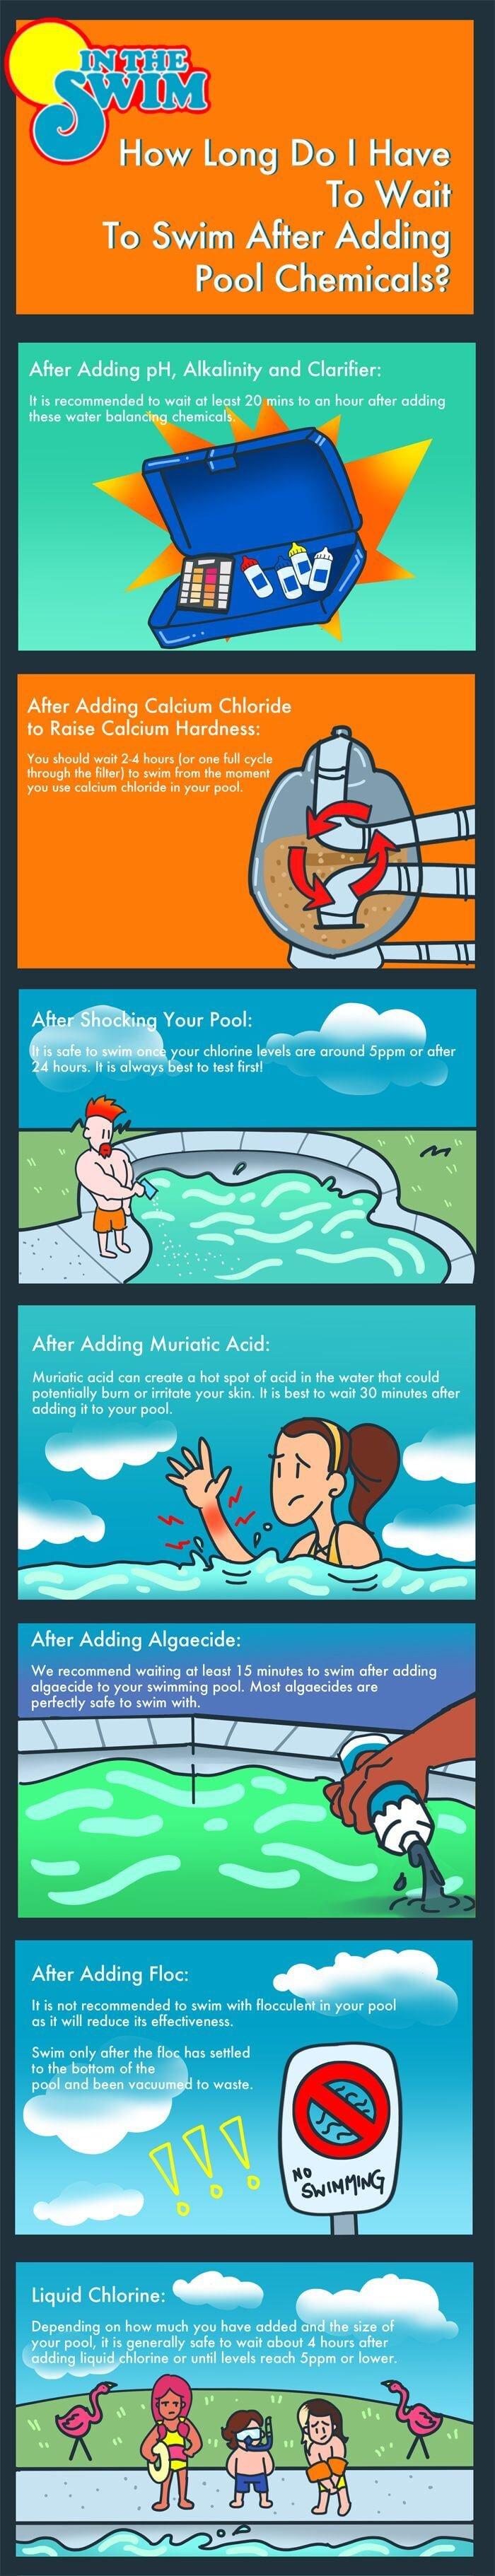 How soon after you shock a pool can you swim Swimming After Adding Pool Chemicals In The Swim Infographic